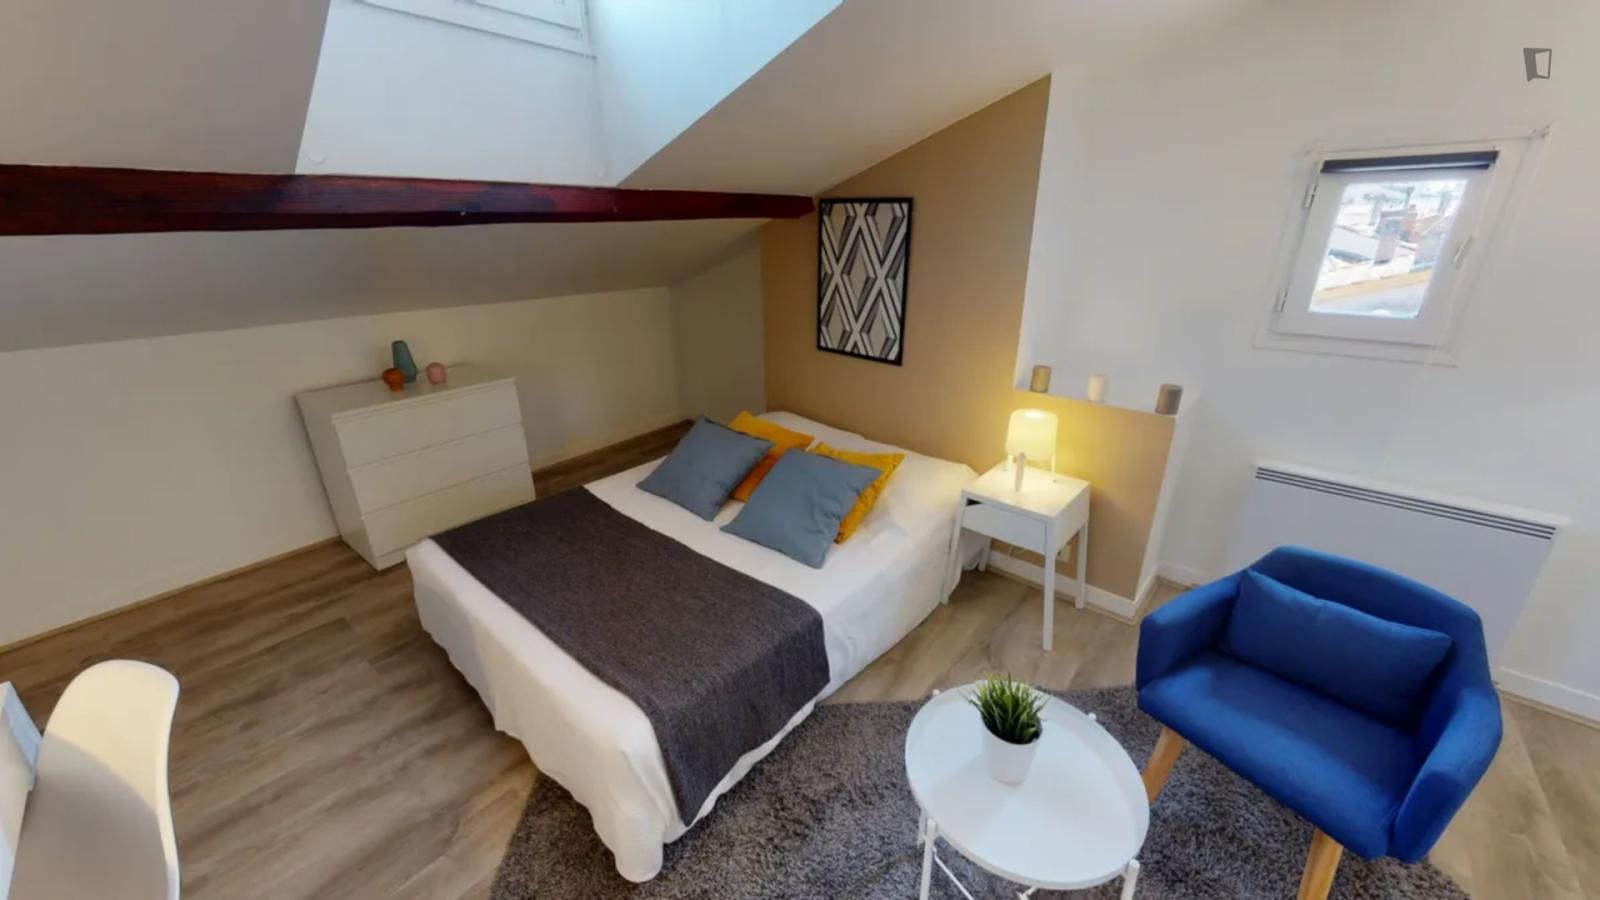 Cosy double bedroom not far from Toulouse Matabiau train station